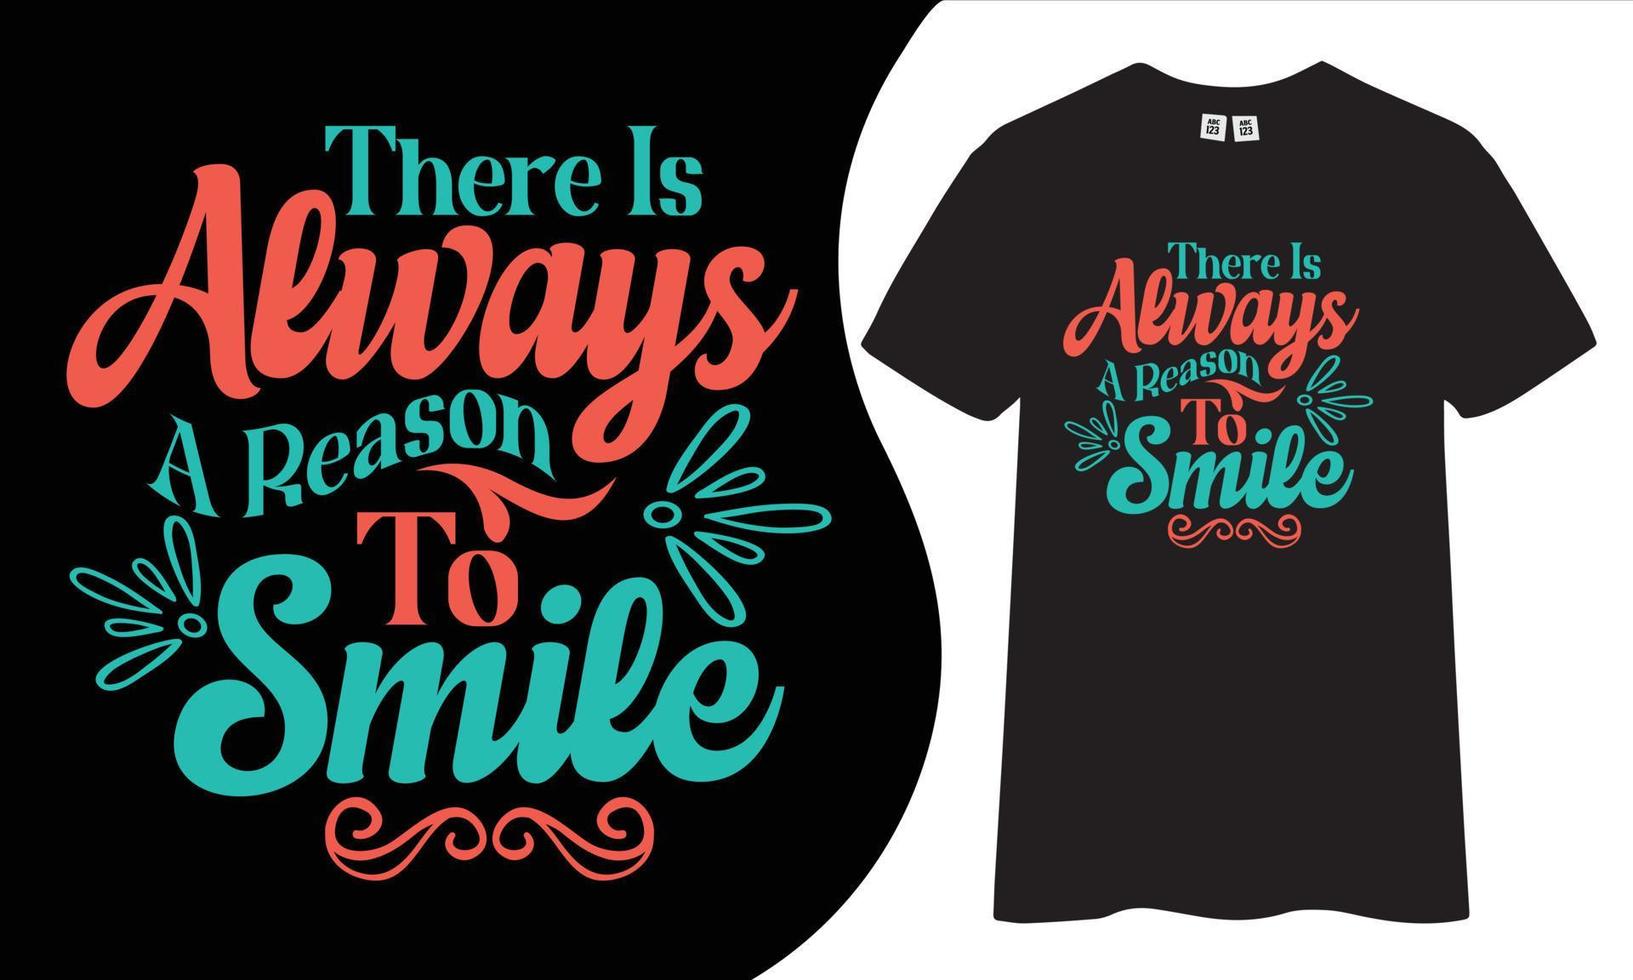 There is always a reason to smile inspirational and motivational typography t-shirt design. vector